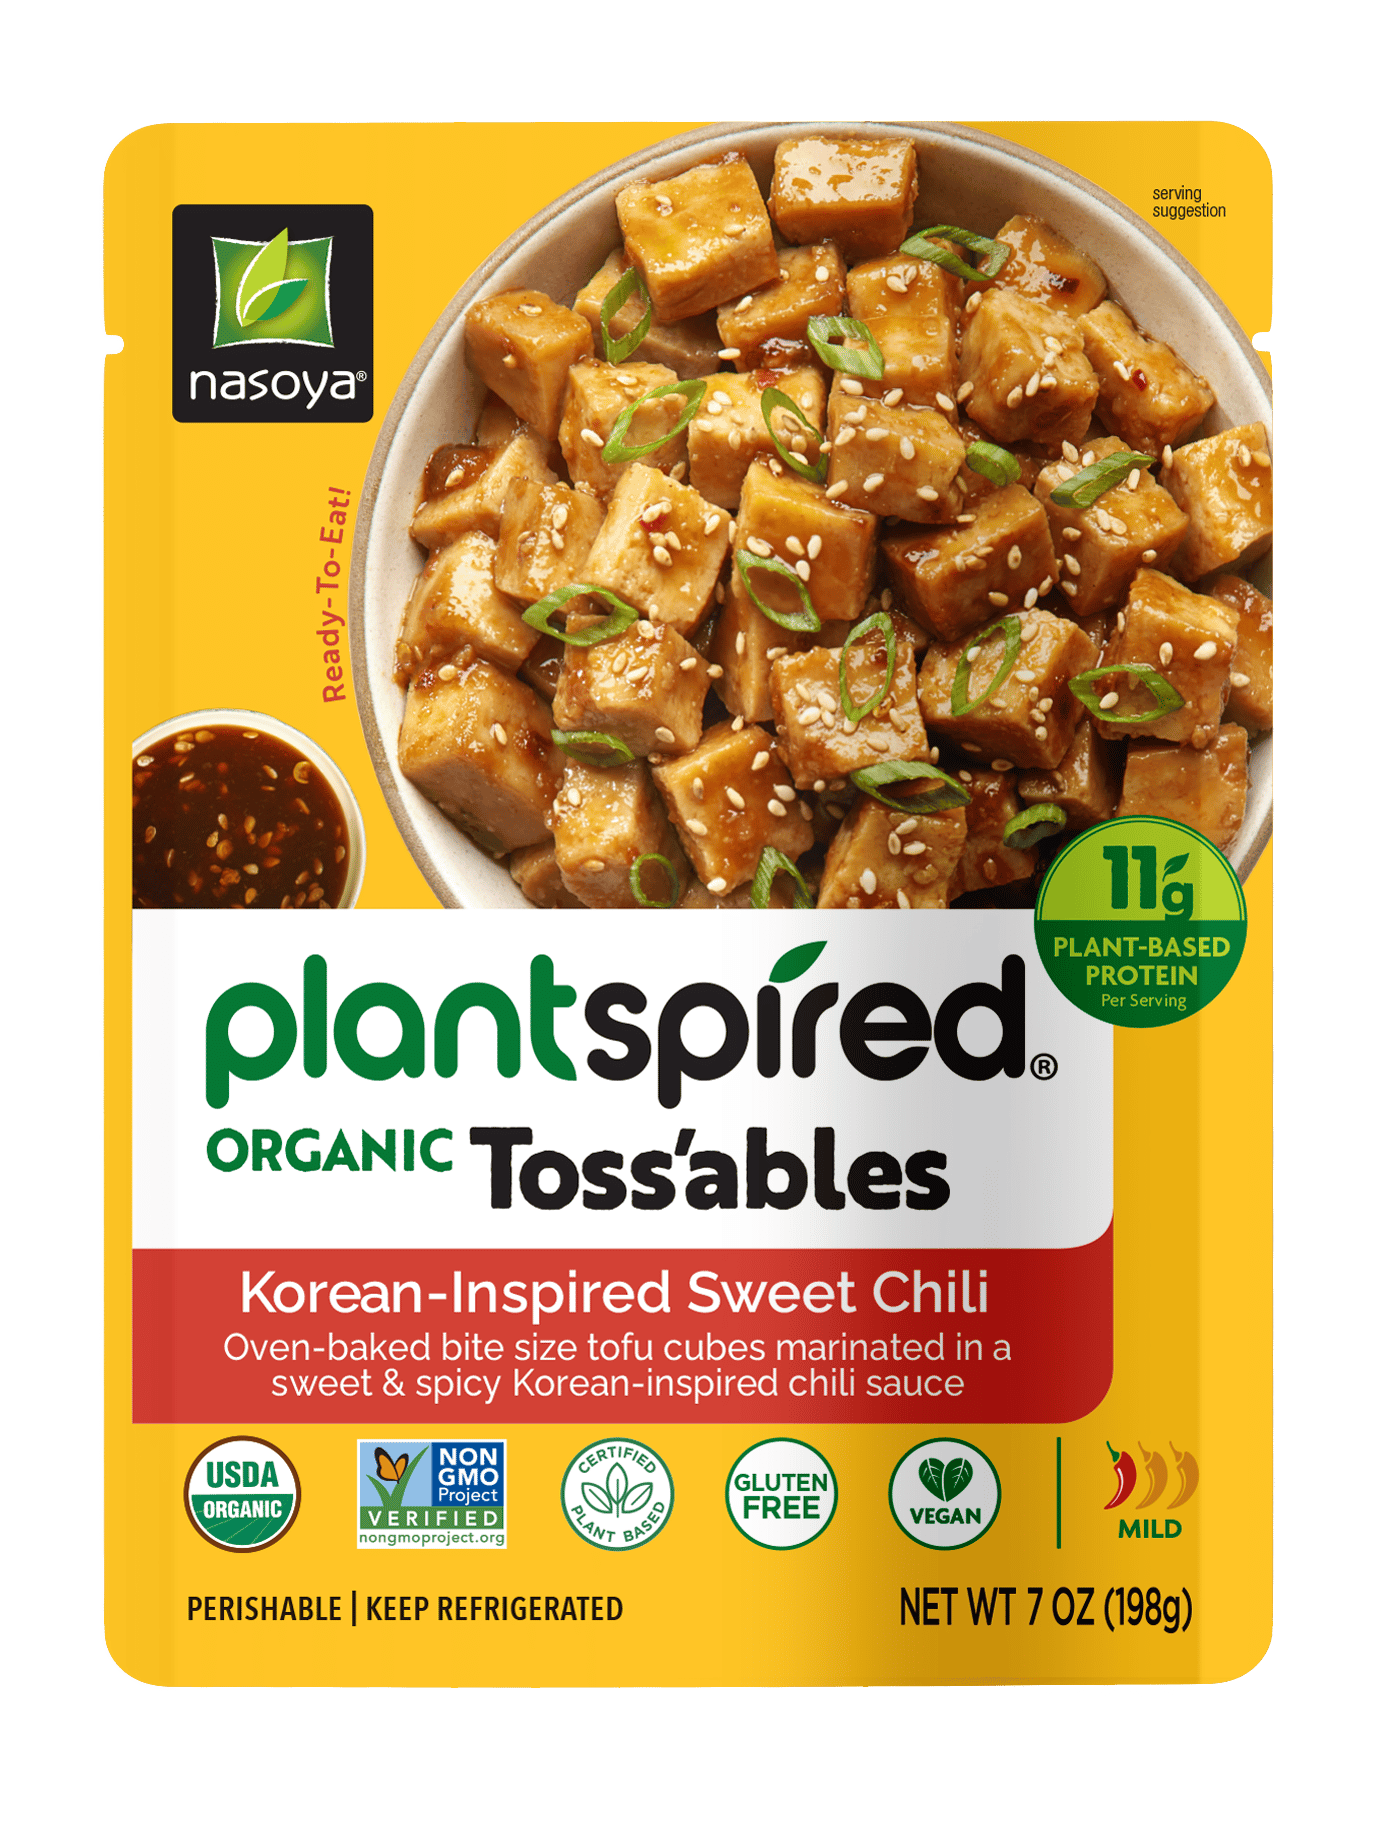 https://www.nasoya.com/wp-content/uploads/2022/04/NAS-Plantspired-Tossables-SweetChili-2.png